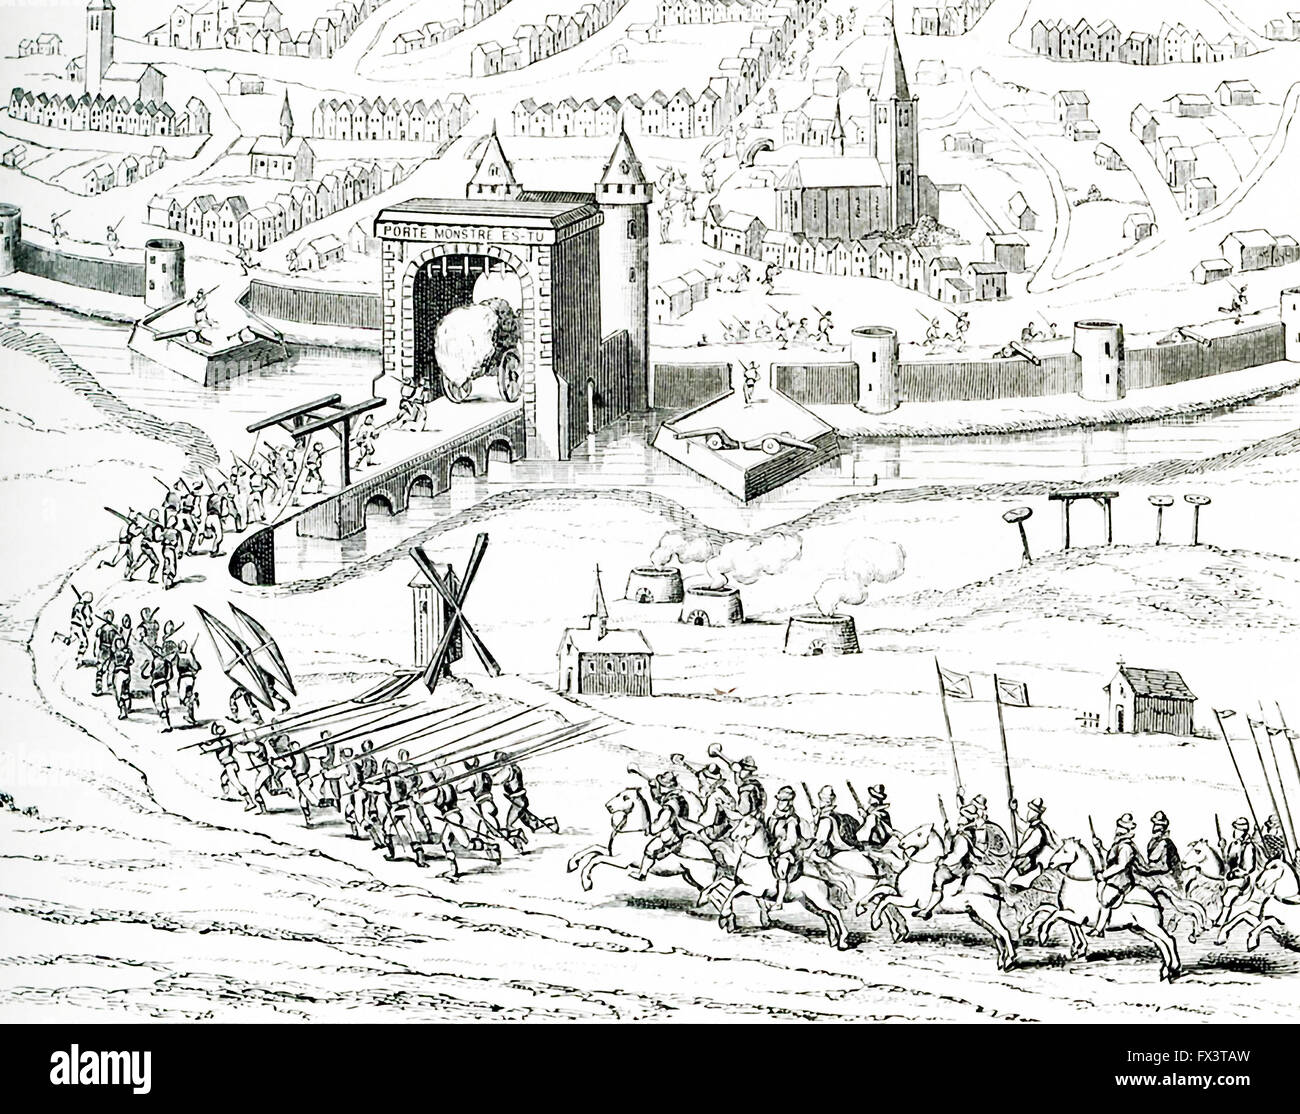 Pictured in this 1597 illustration is the surprise attack on Amiens in France by the Spanish on March 11 that very year. The illustration is from a drawing whose inscription read: Portrait of the city of Amiens, when it was taken by surprise on Mar 11, 1597, with one carriage, and few people. Among the people was the governor of Doullens [which city had been taken by the Spanish in 1595]. The battle was part of the Franco-Spanish War, which in turn was part of the French Wars of Religion and the Anglo-Saxon War. Just months later, in September, the French retook the city. Stock Photo